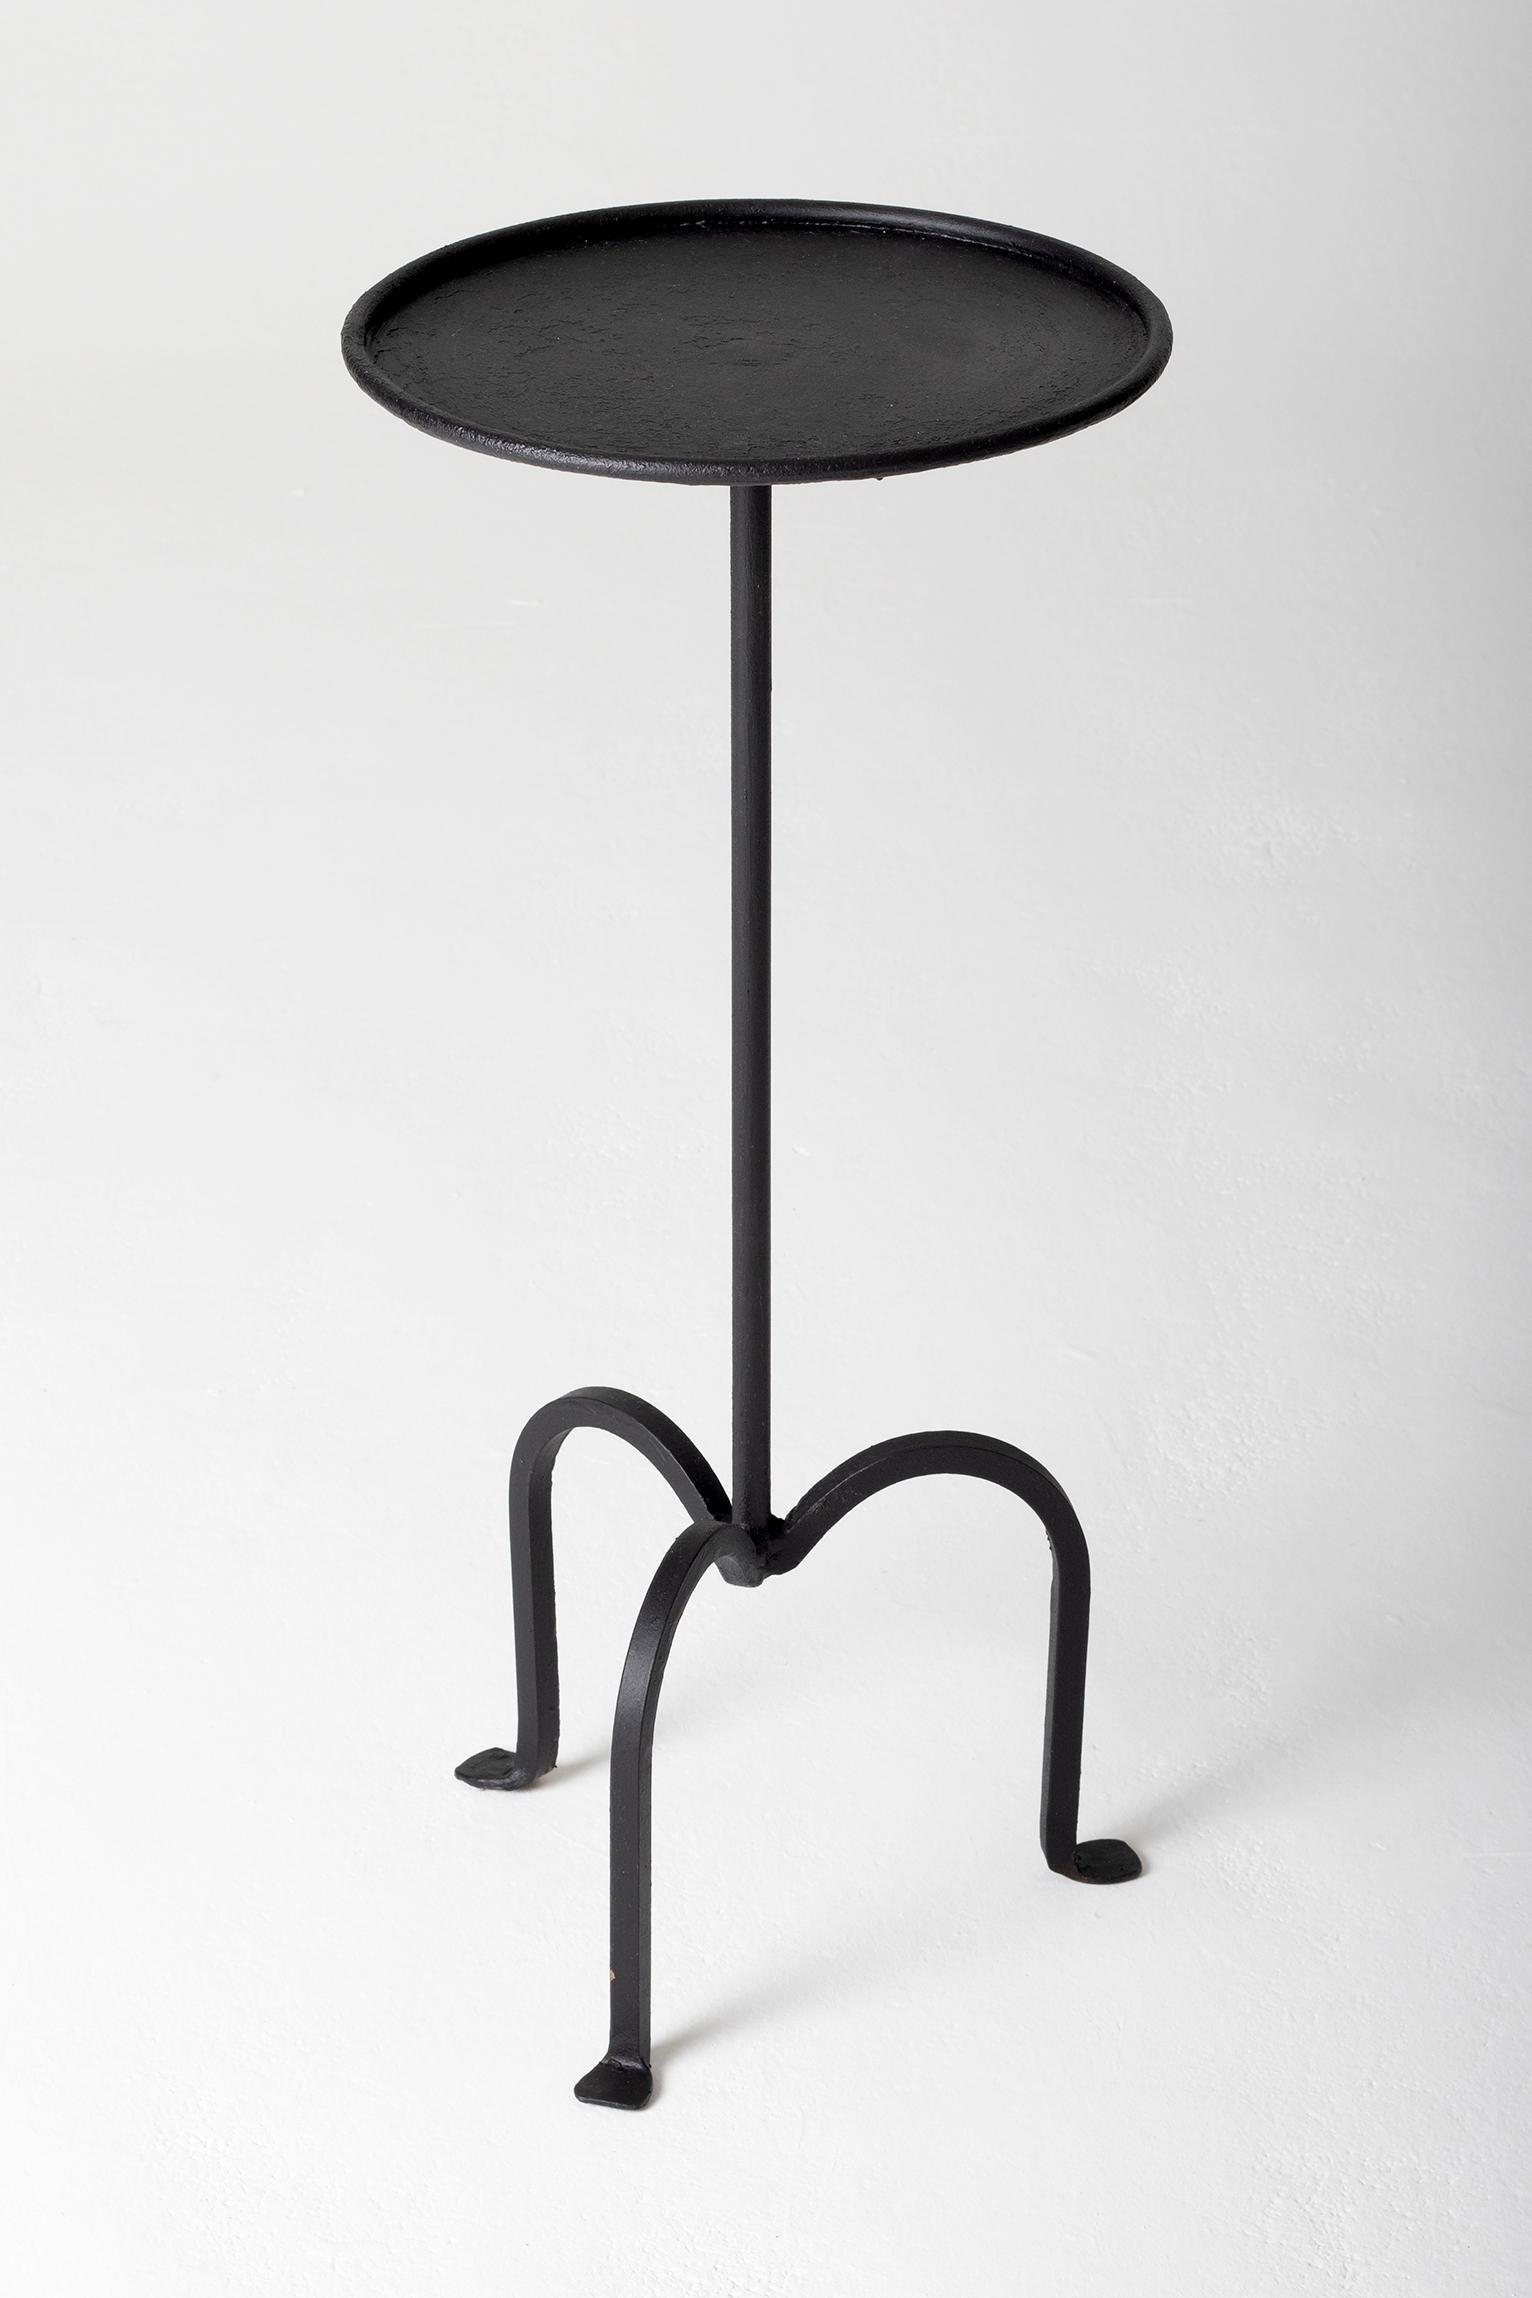 A black patinated wrought iron martini table.
Spain, second half of the 20th century.